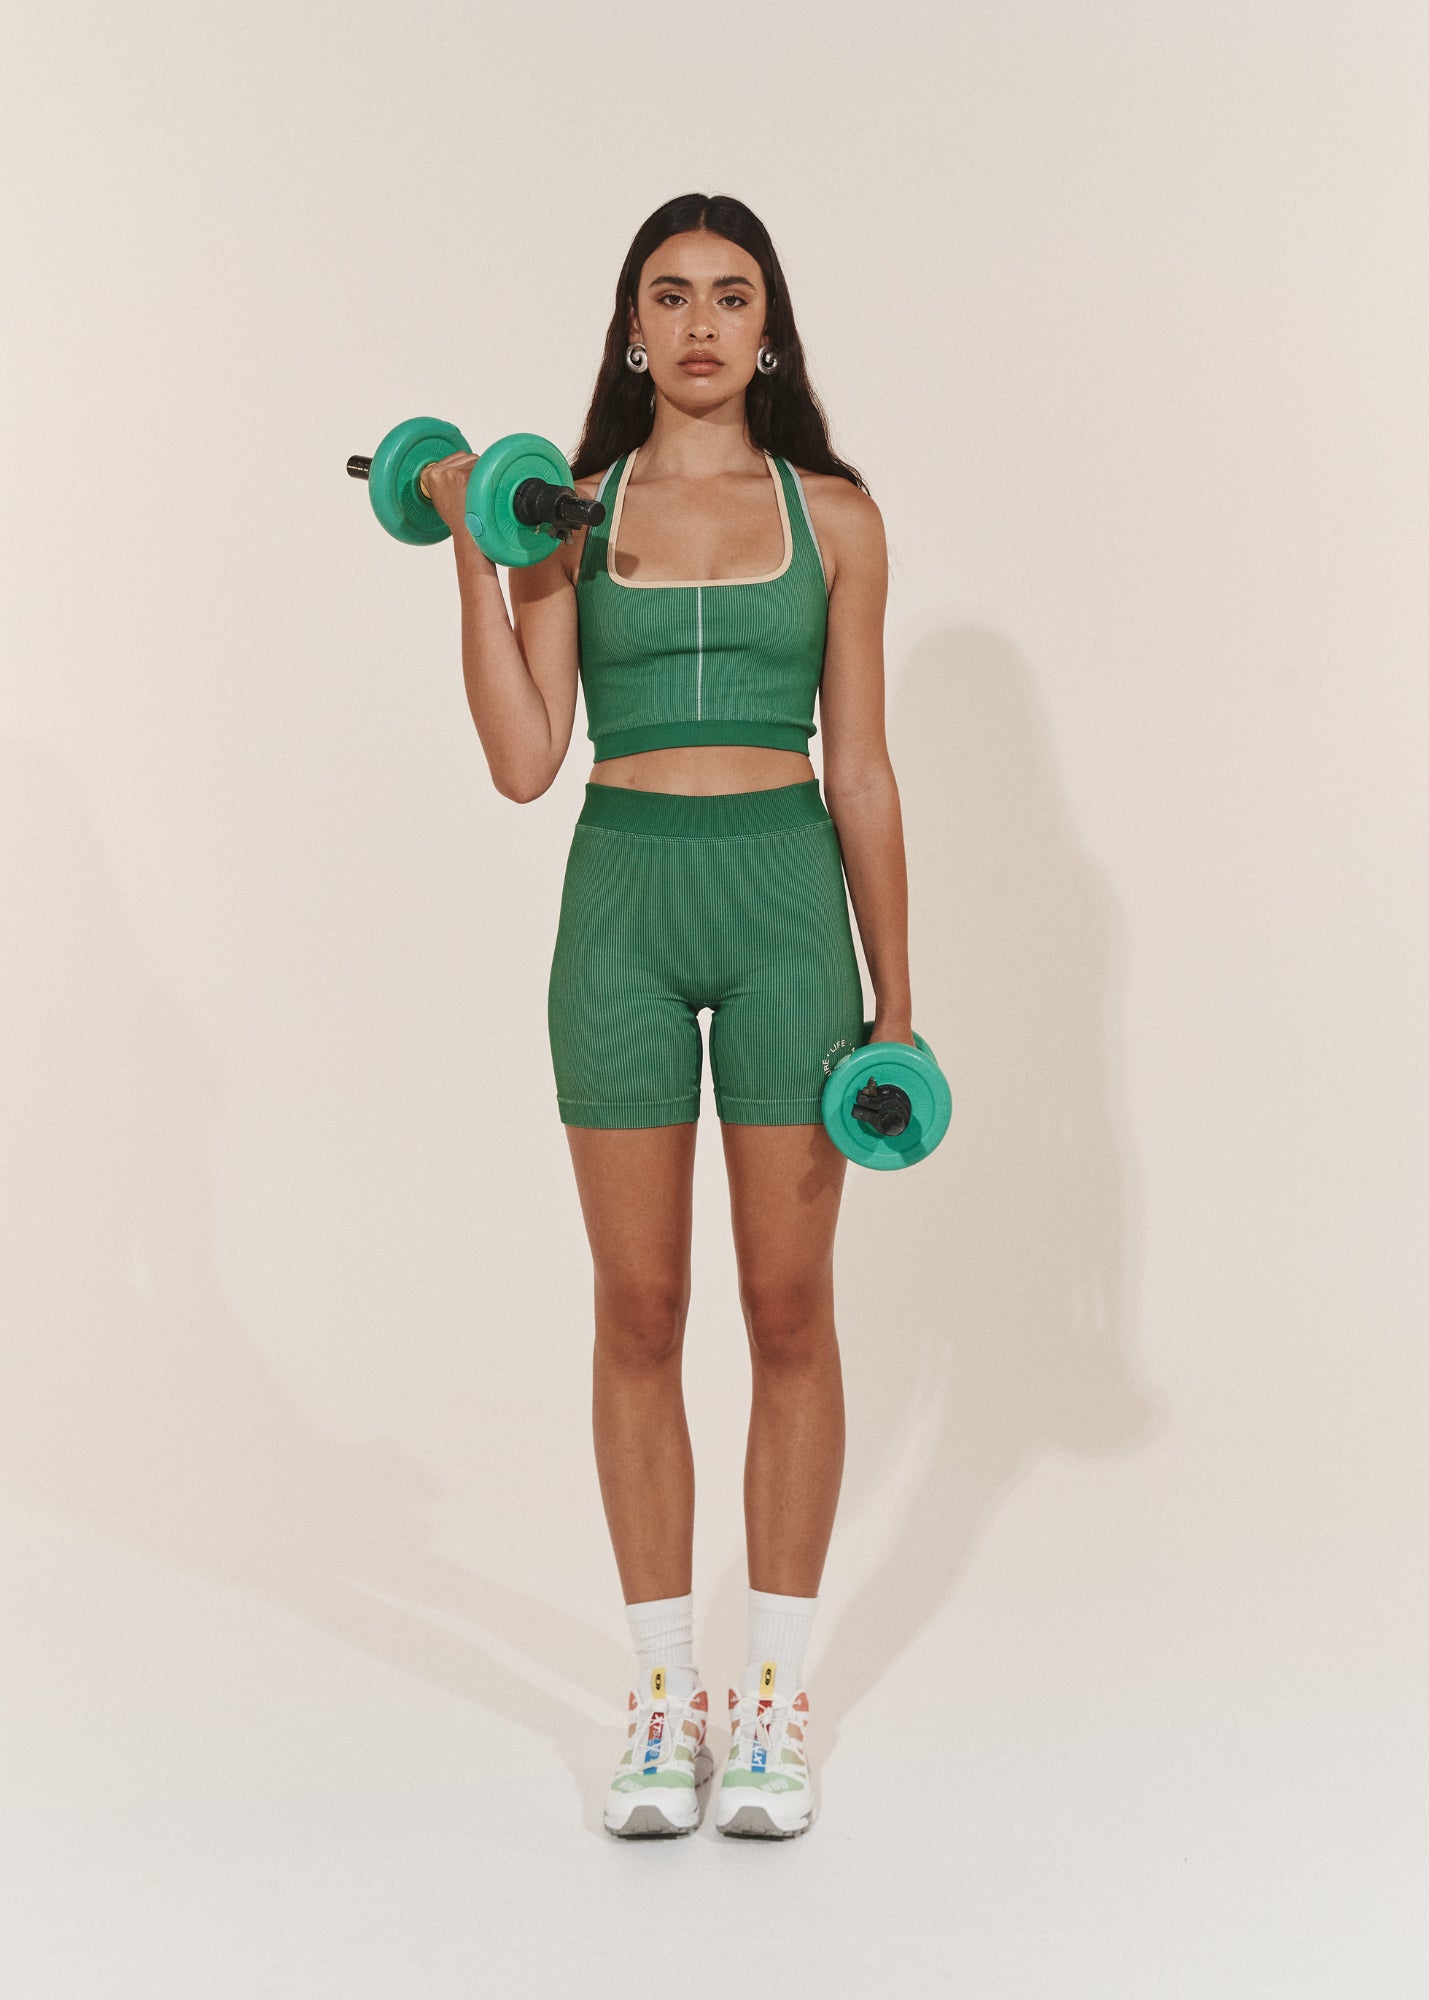 Shop Sustainable & Ethical Women's Activewear at Stride